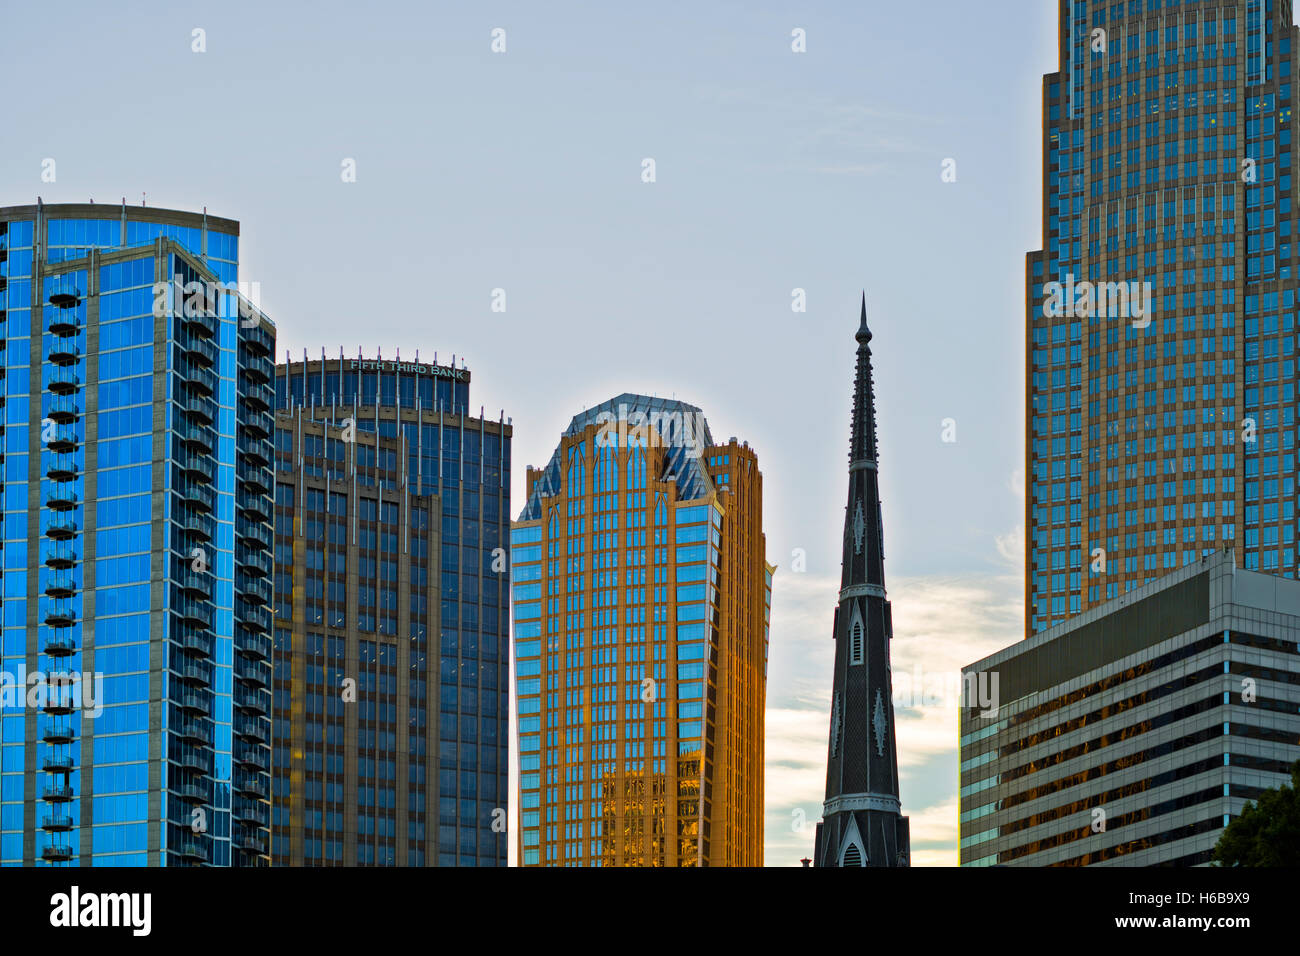 Architecture, Buildings in the City of Charlotte, NC Stock Photo